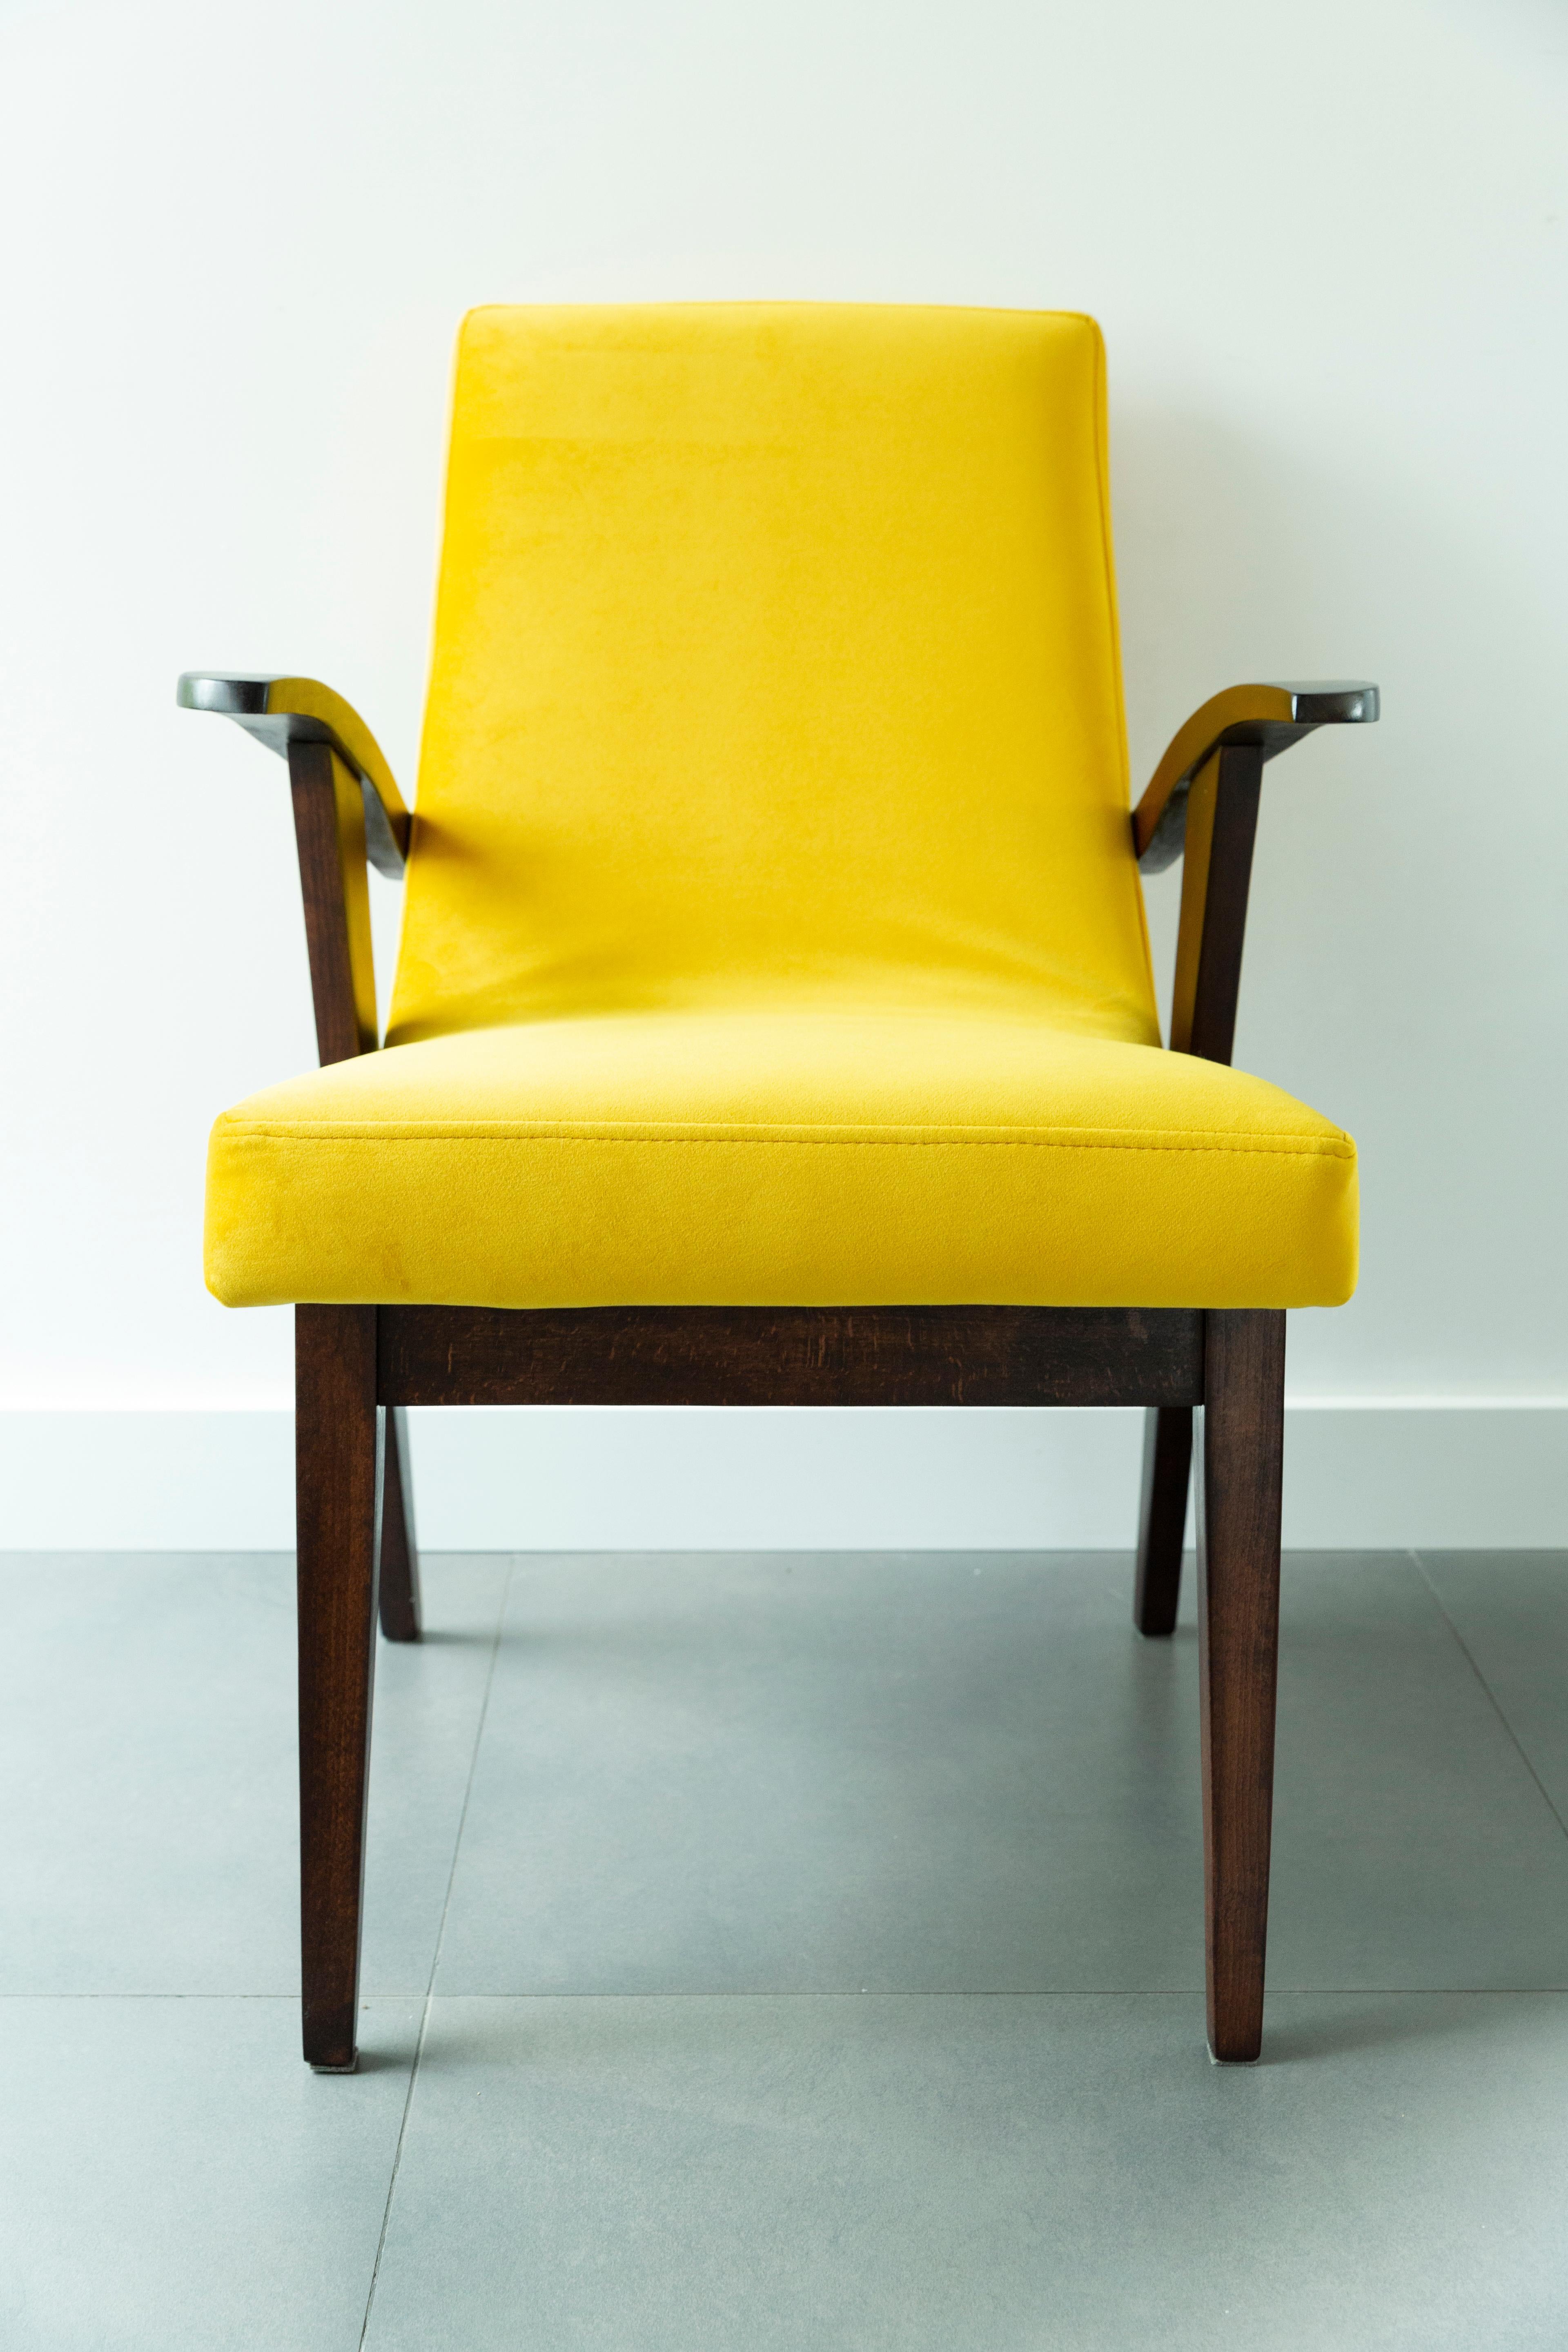 Textile 20th Century Vintage Yellow Armchair by Mieczyslaw Puchala, 1960s For Sale